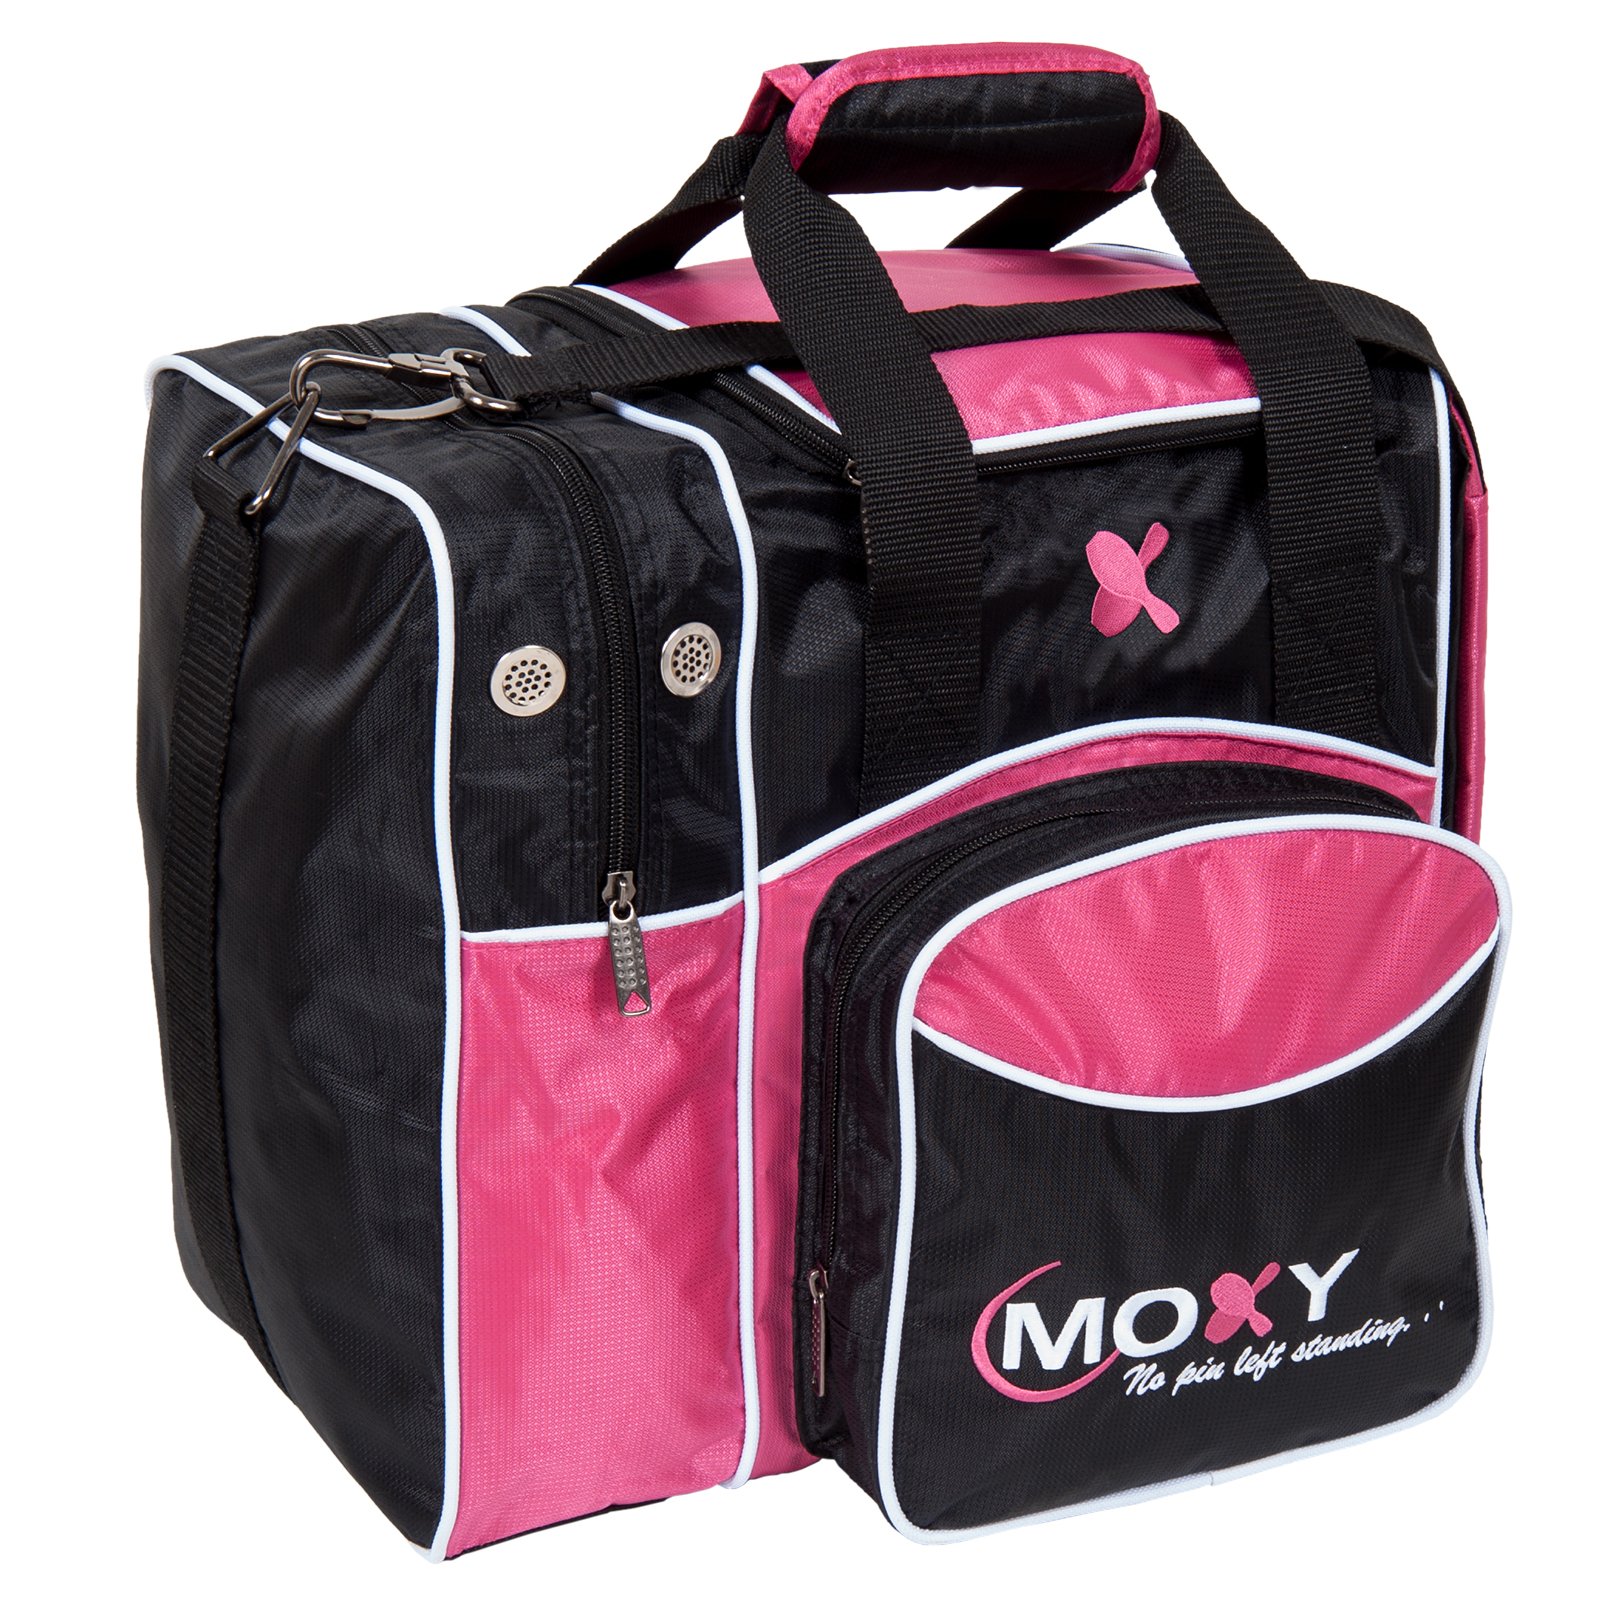 Moxy Double Roller Bowling Bag- Pink/Black